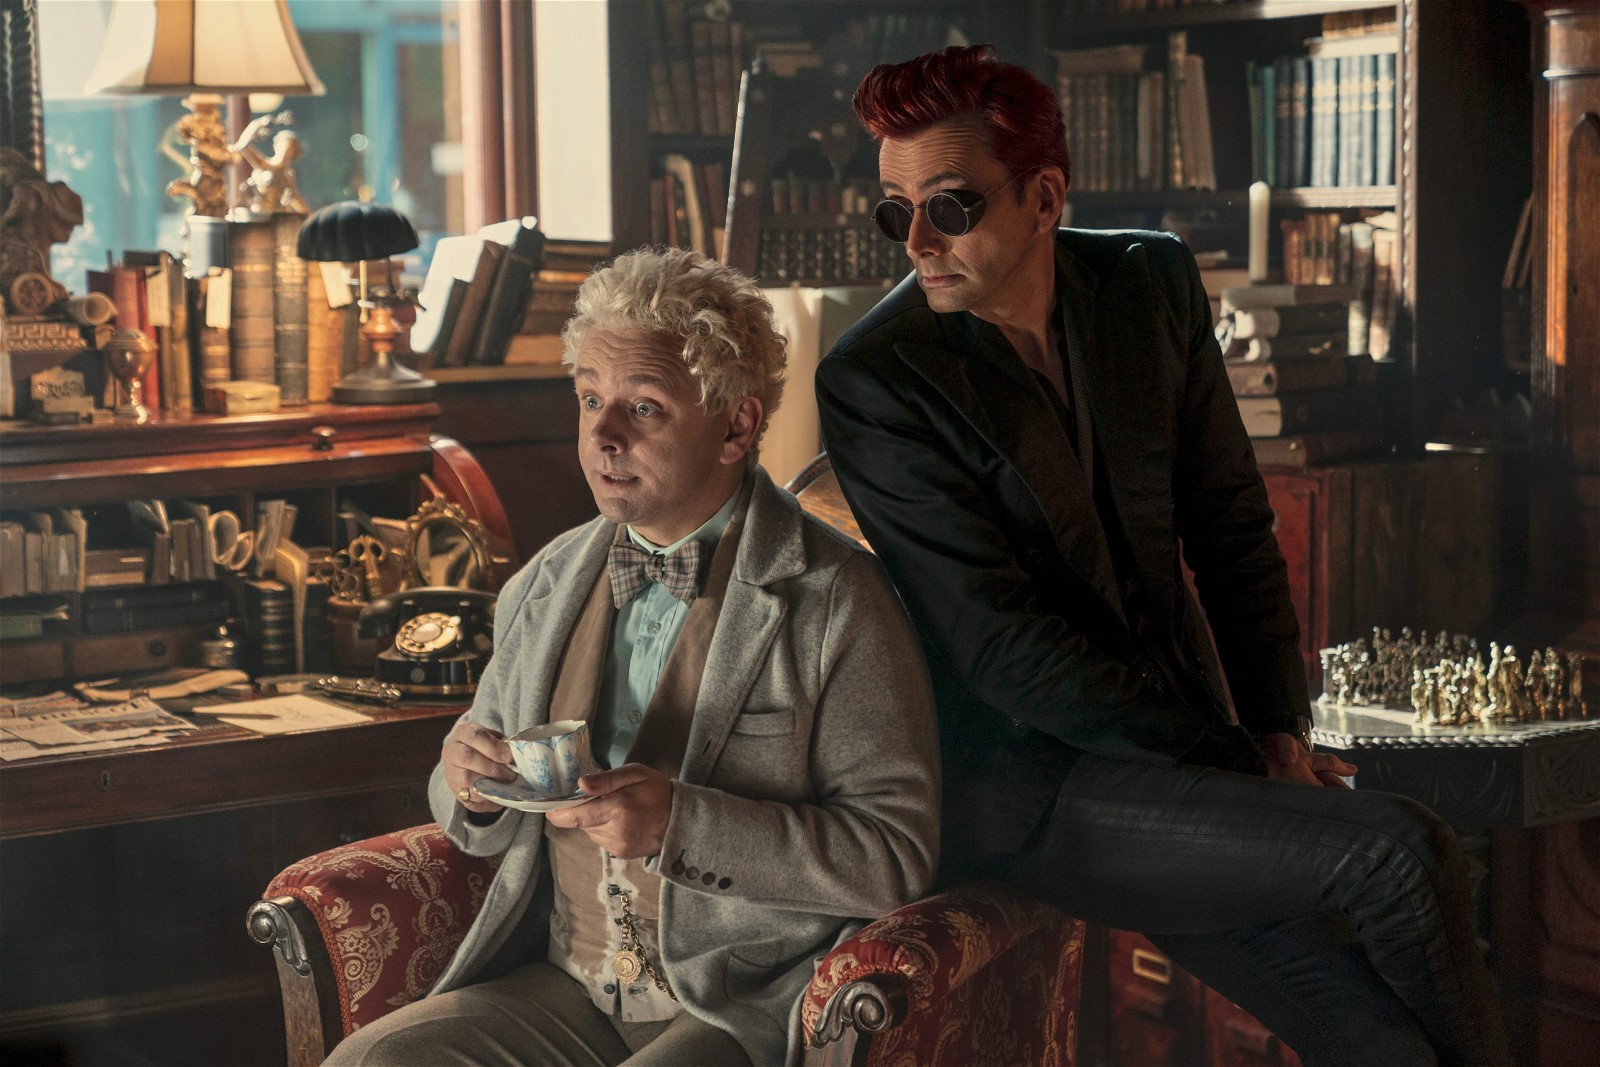 (L to R) Michael Sheen as Aziraphale and David Tennant as Crowley in Good Omens 2